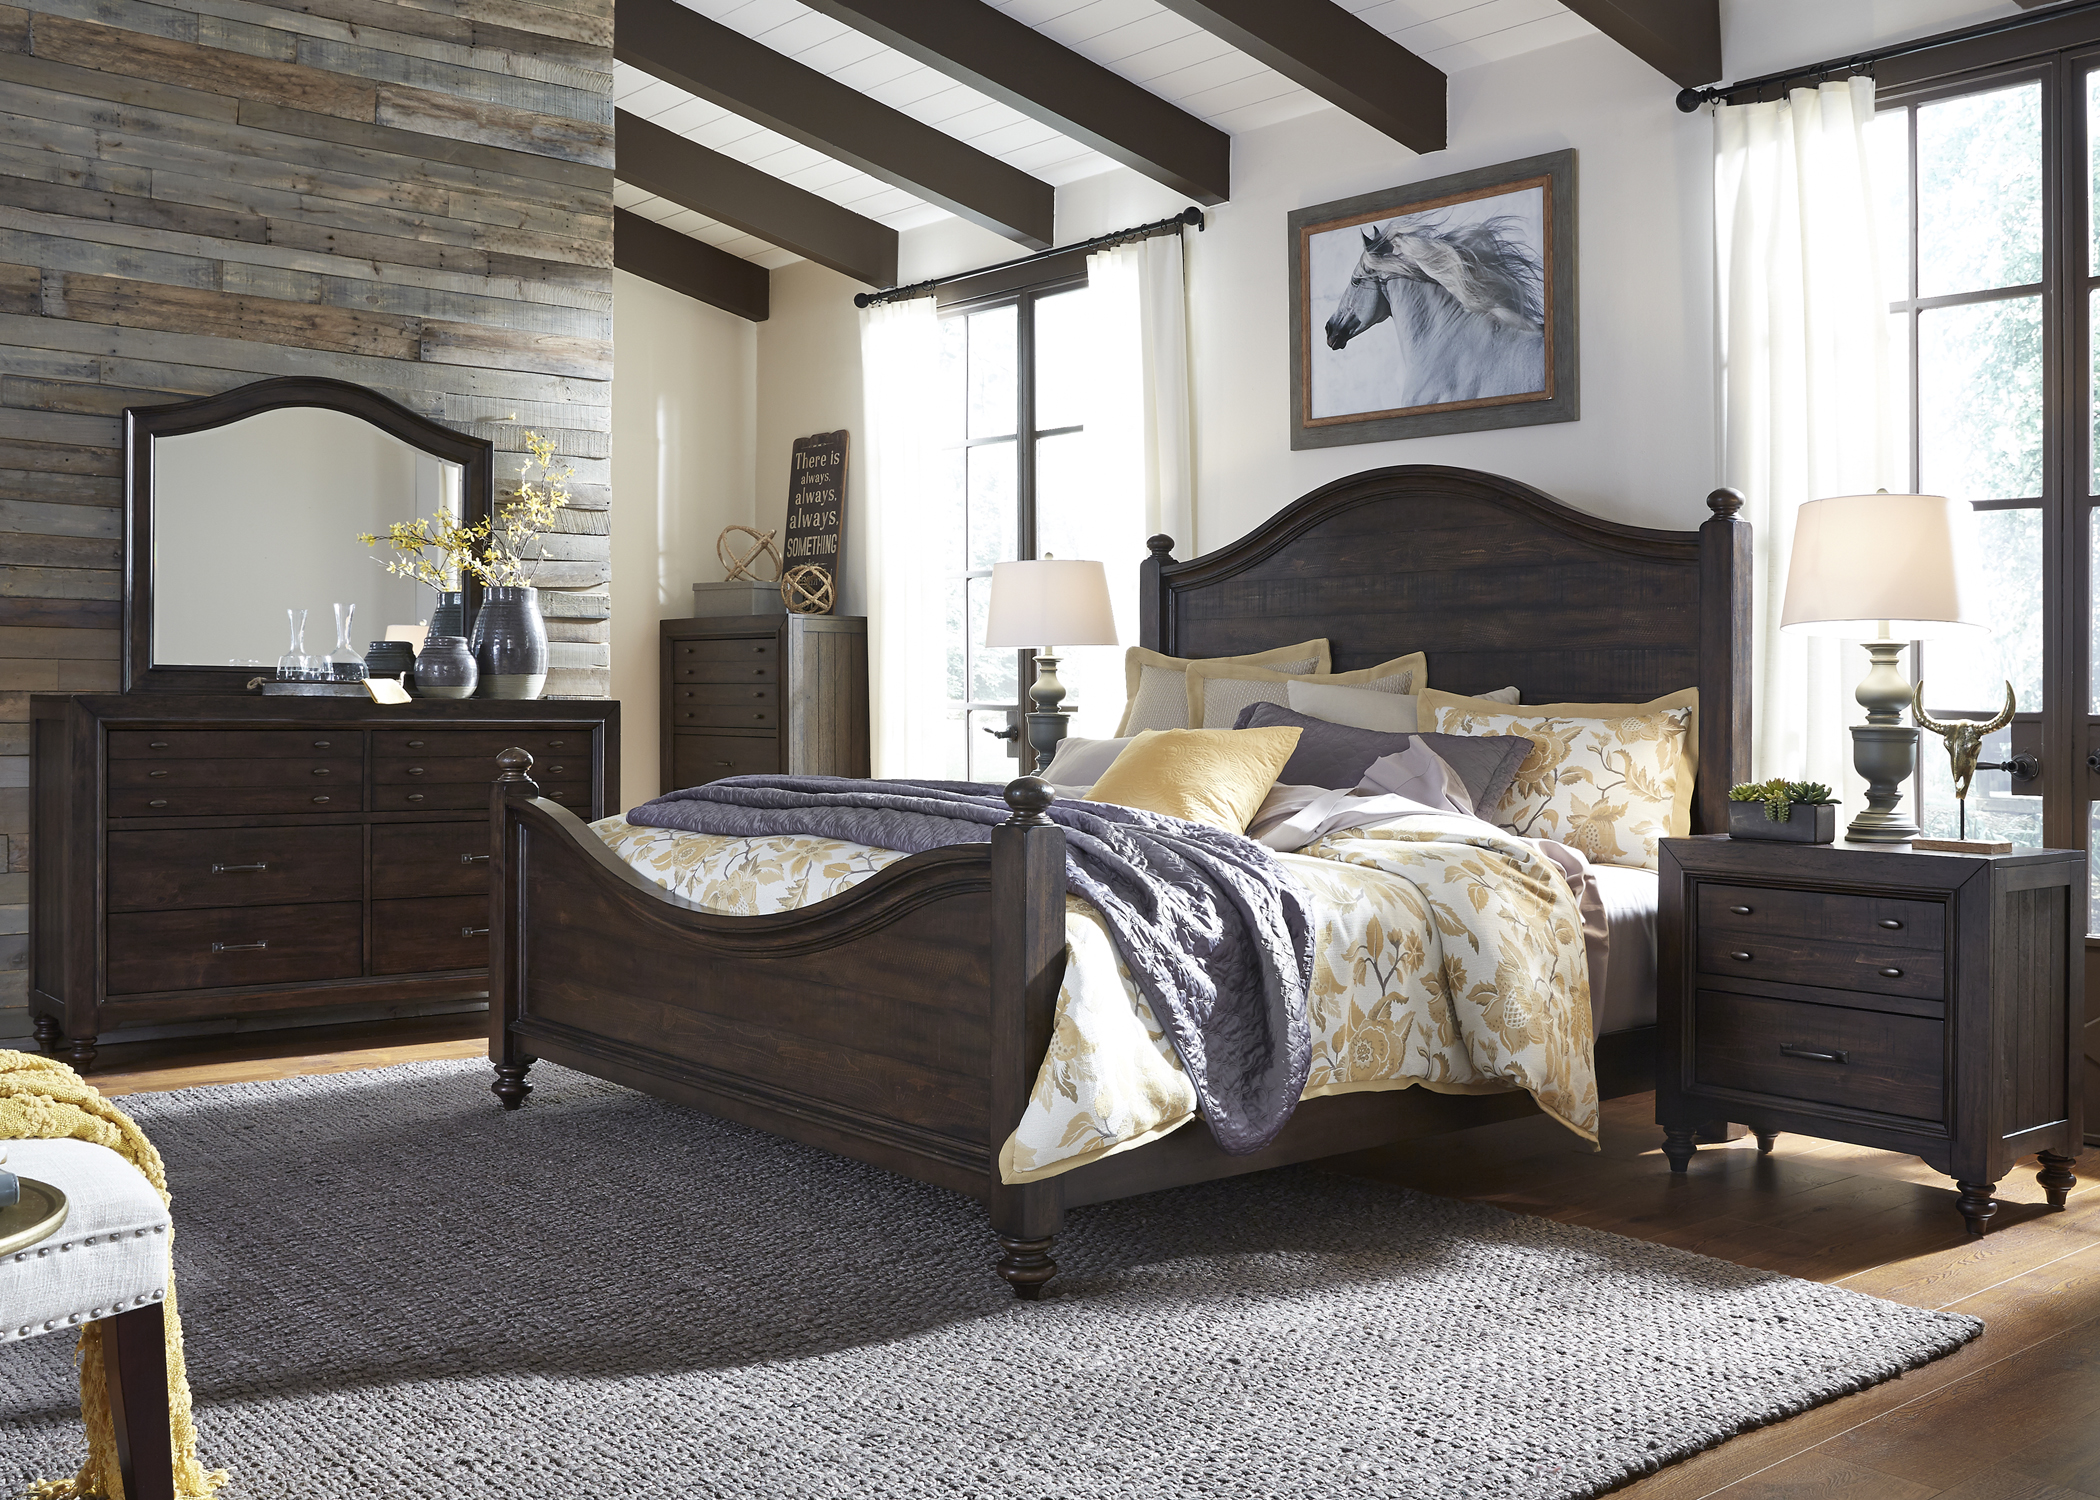 Liberty Furniture Catawba Hills Bedroom King Poster Bed, Dresser, Mirror, Chest, and Night Stand Collection